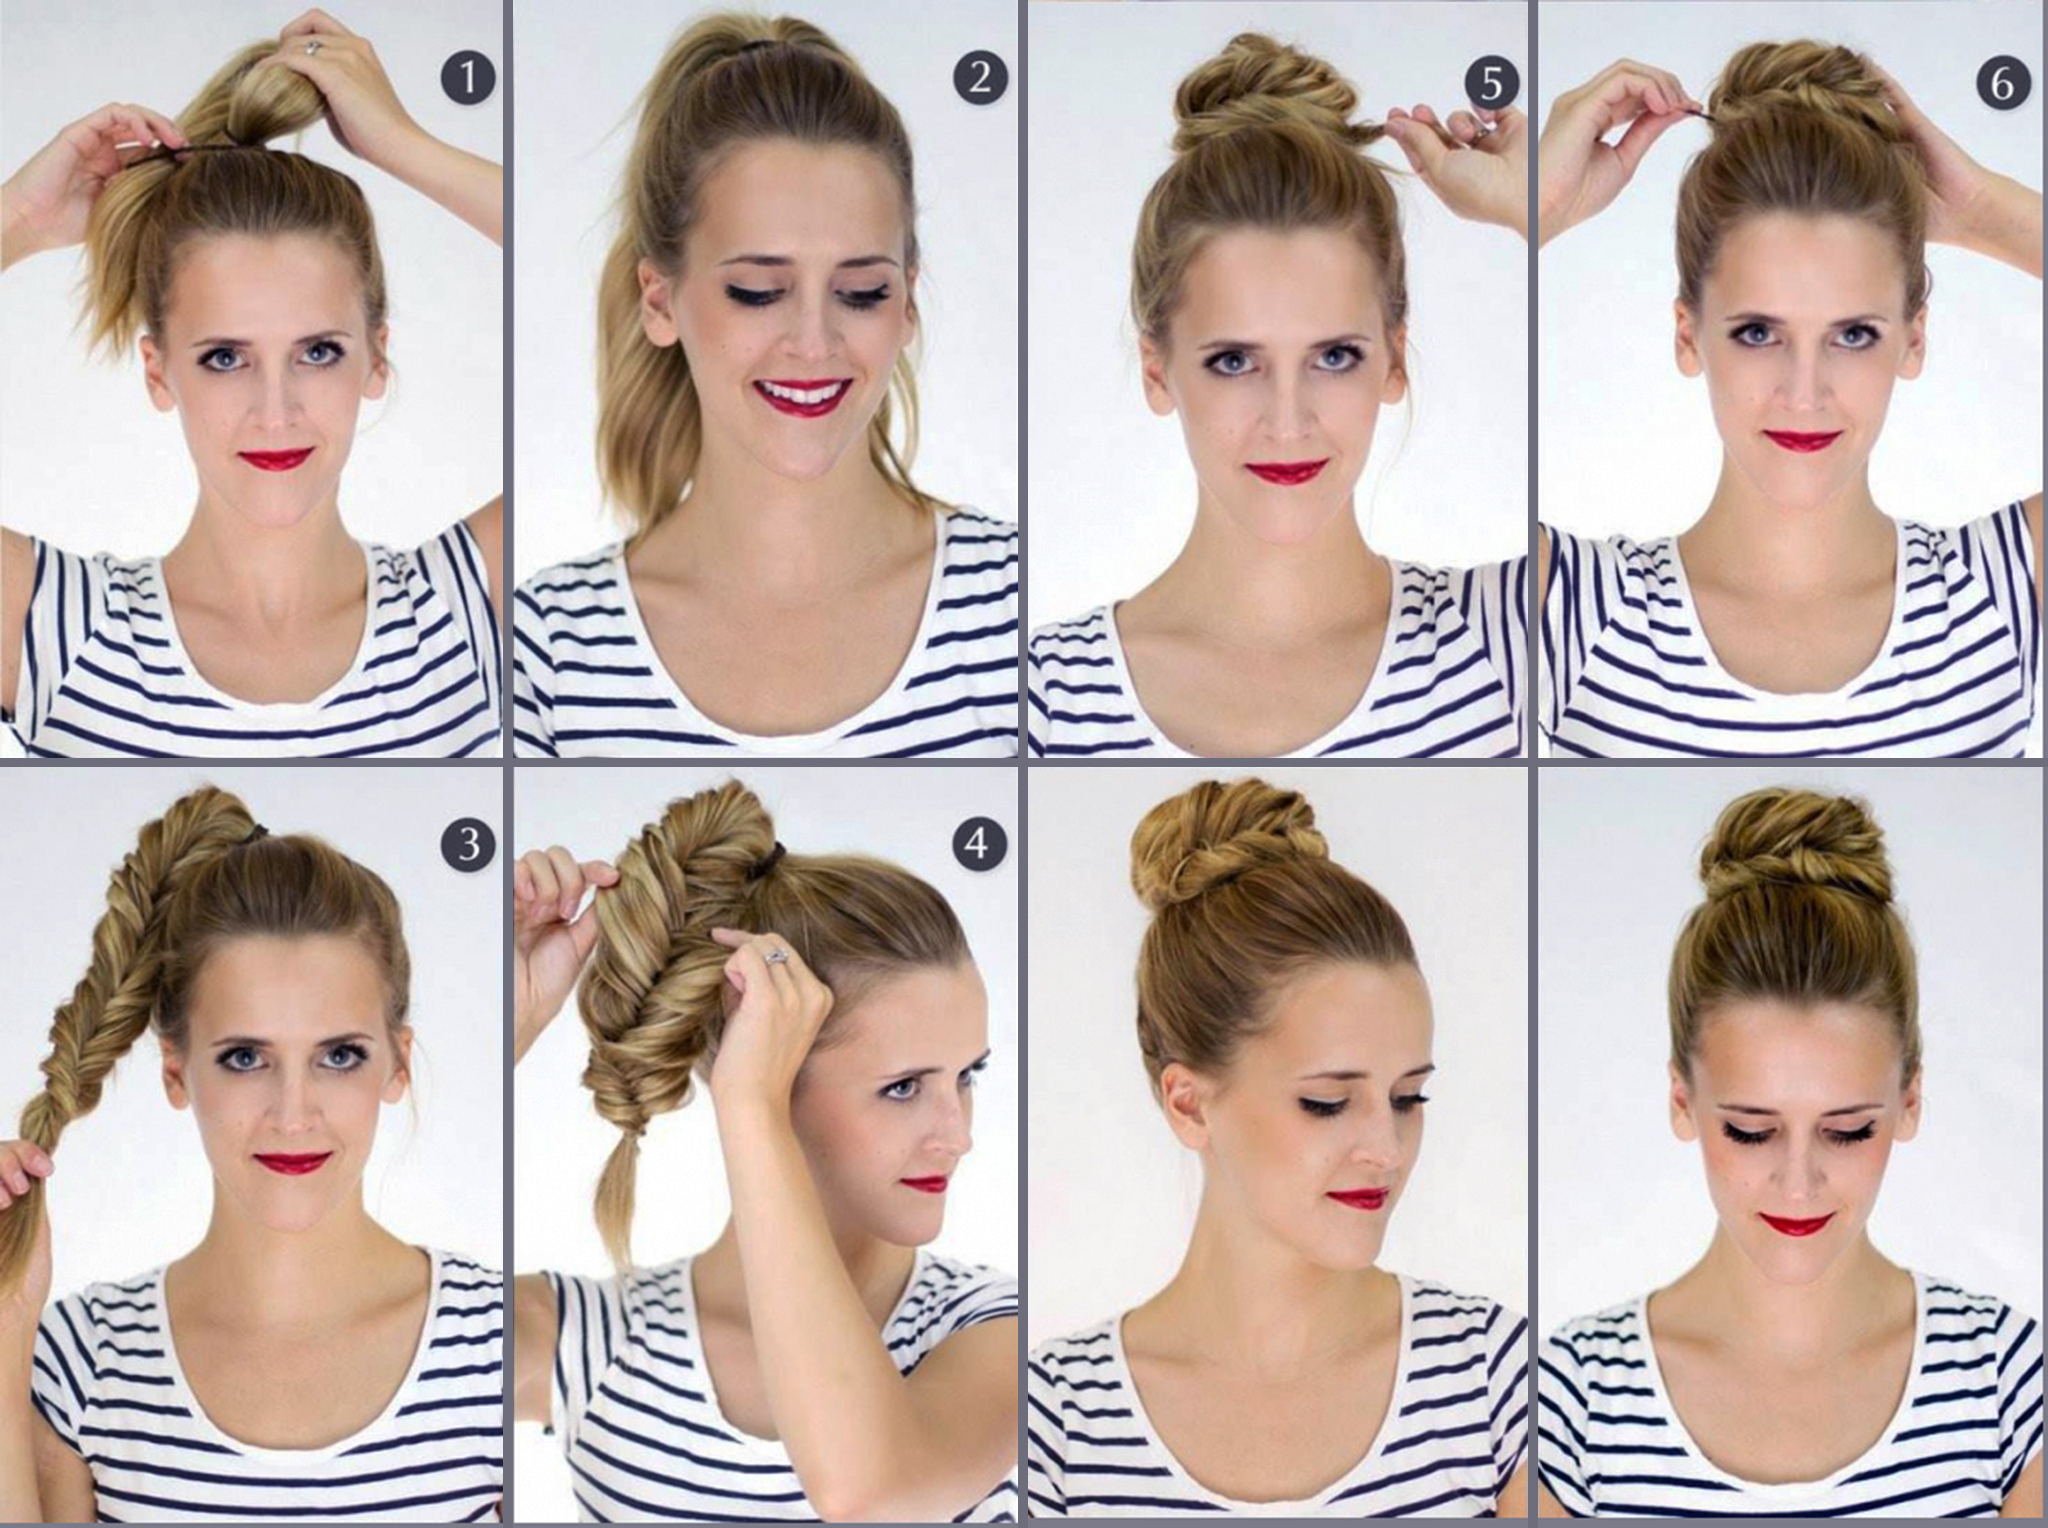 9. "Blonde Messy Bun: The Perfect Tomboy Updo" - wide 3